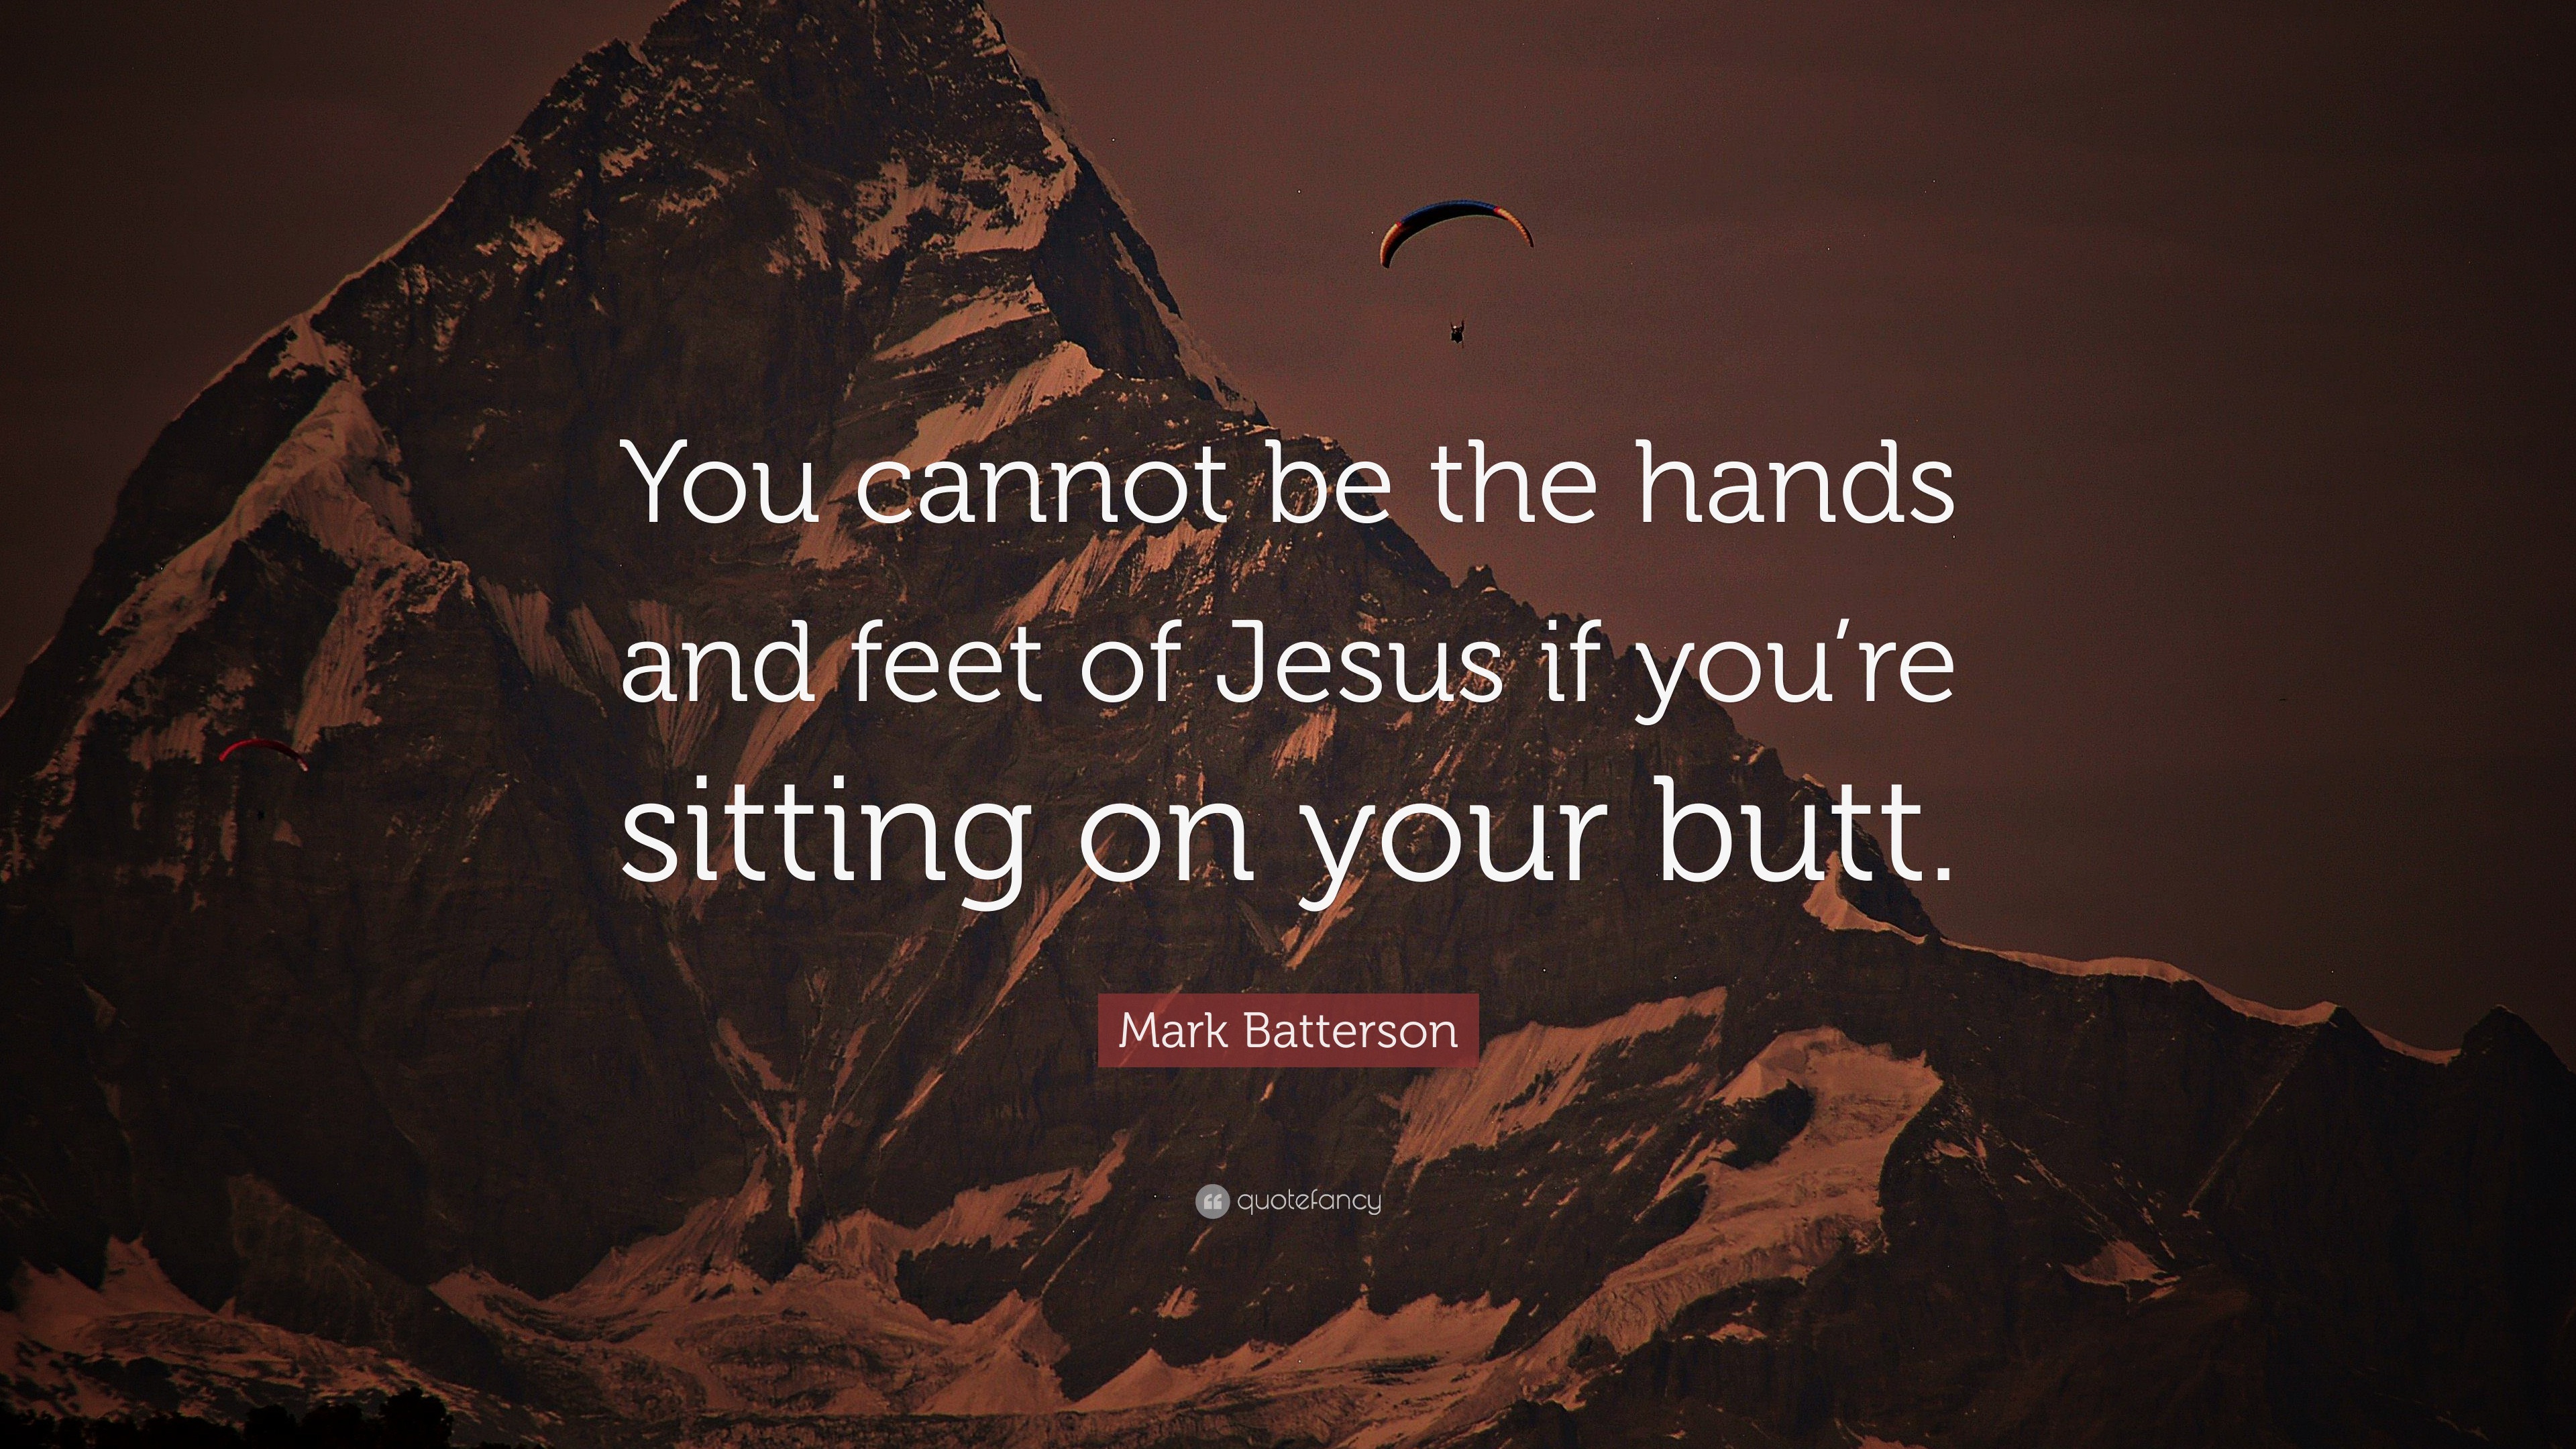 Mark Batterson Quote You Cannot Be The Hands And Feet Of Jesus If You Re Sitting